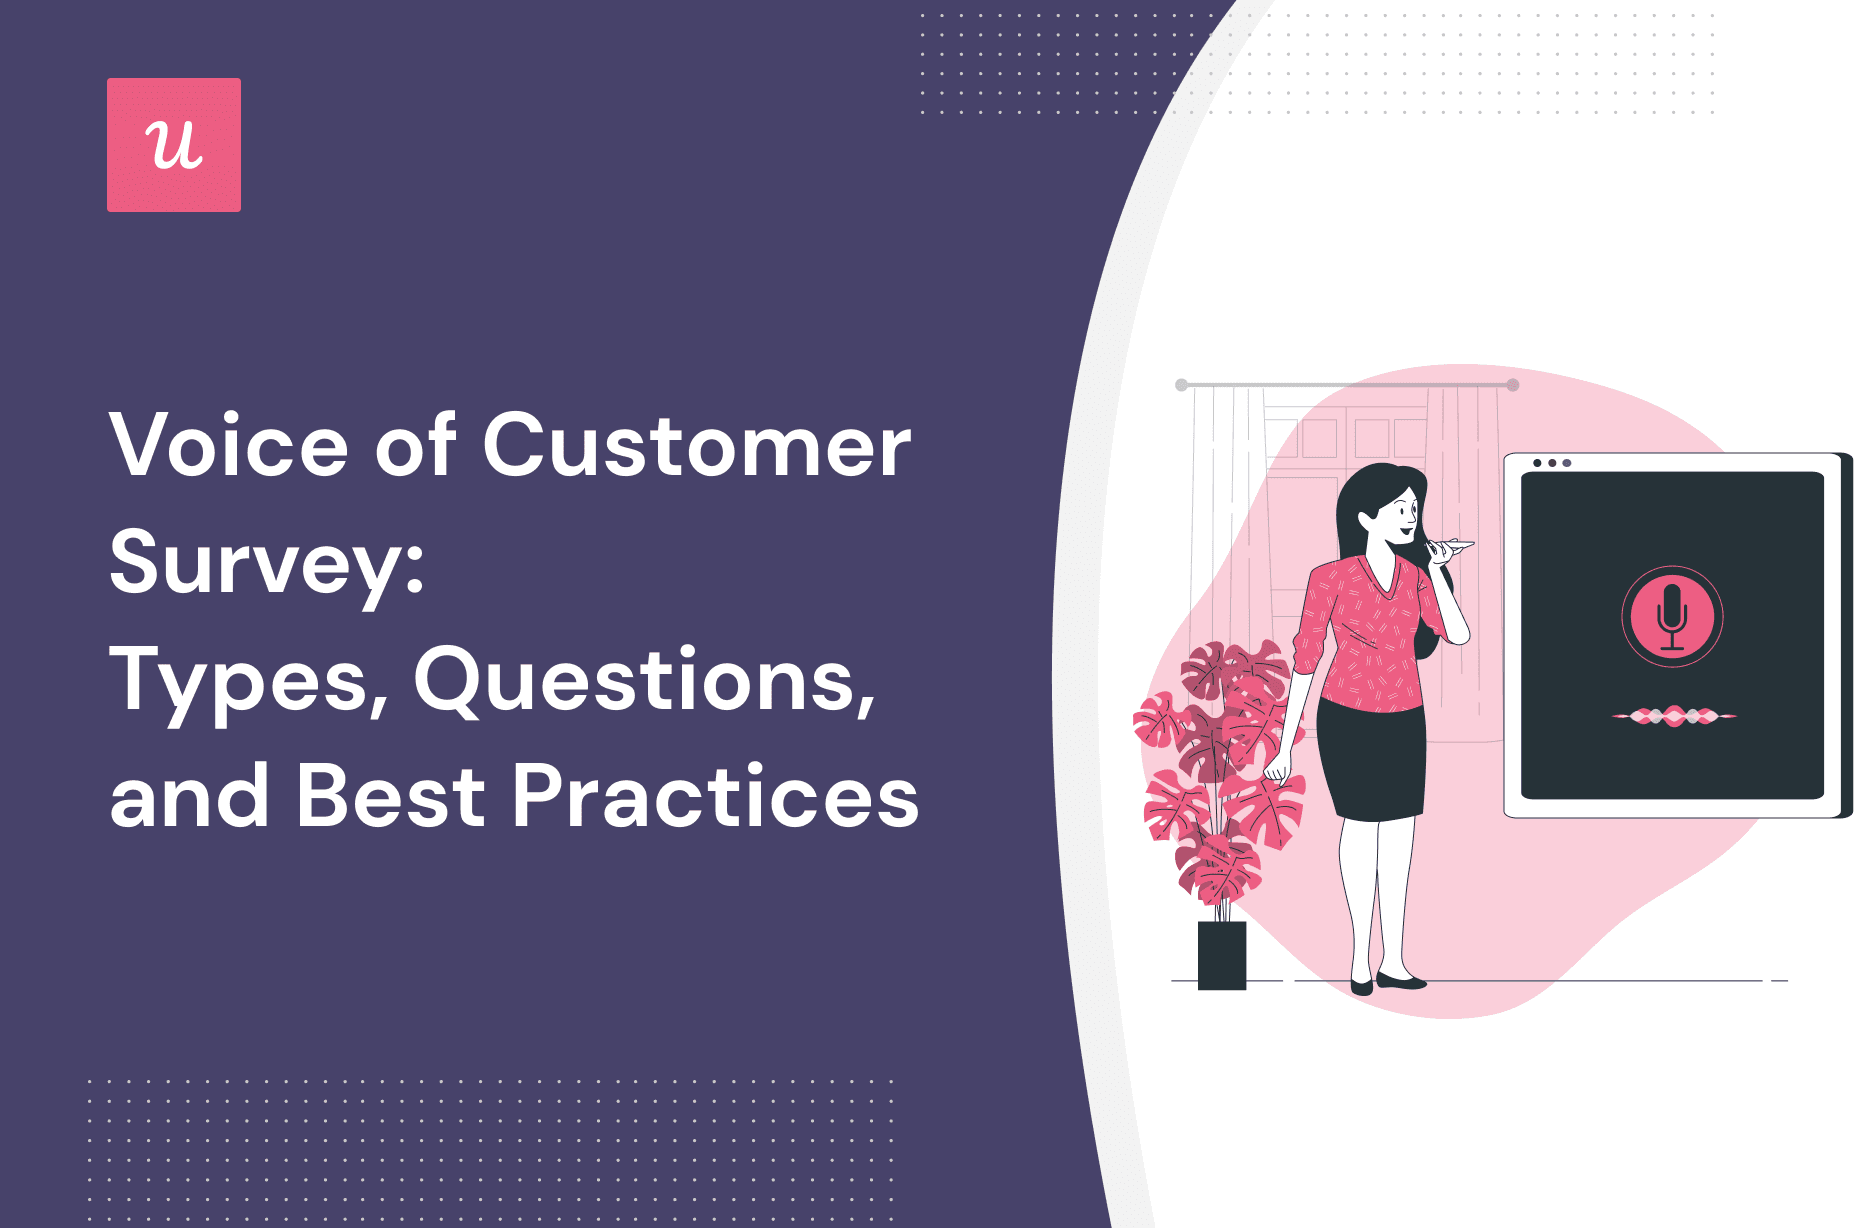 Voice of Customer Survey: Types, Questions, and Best Practices cover